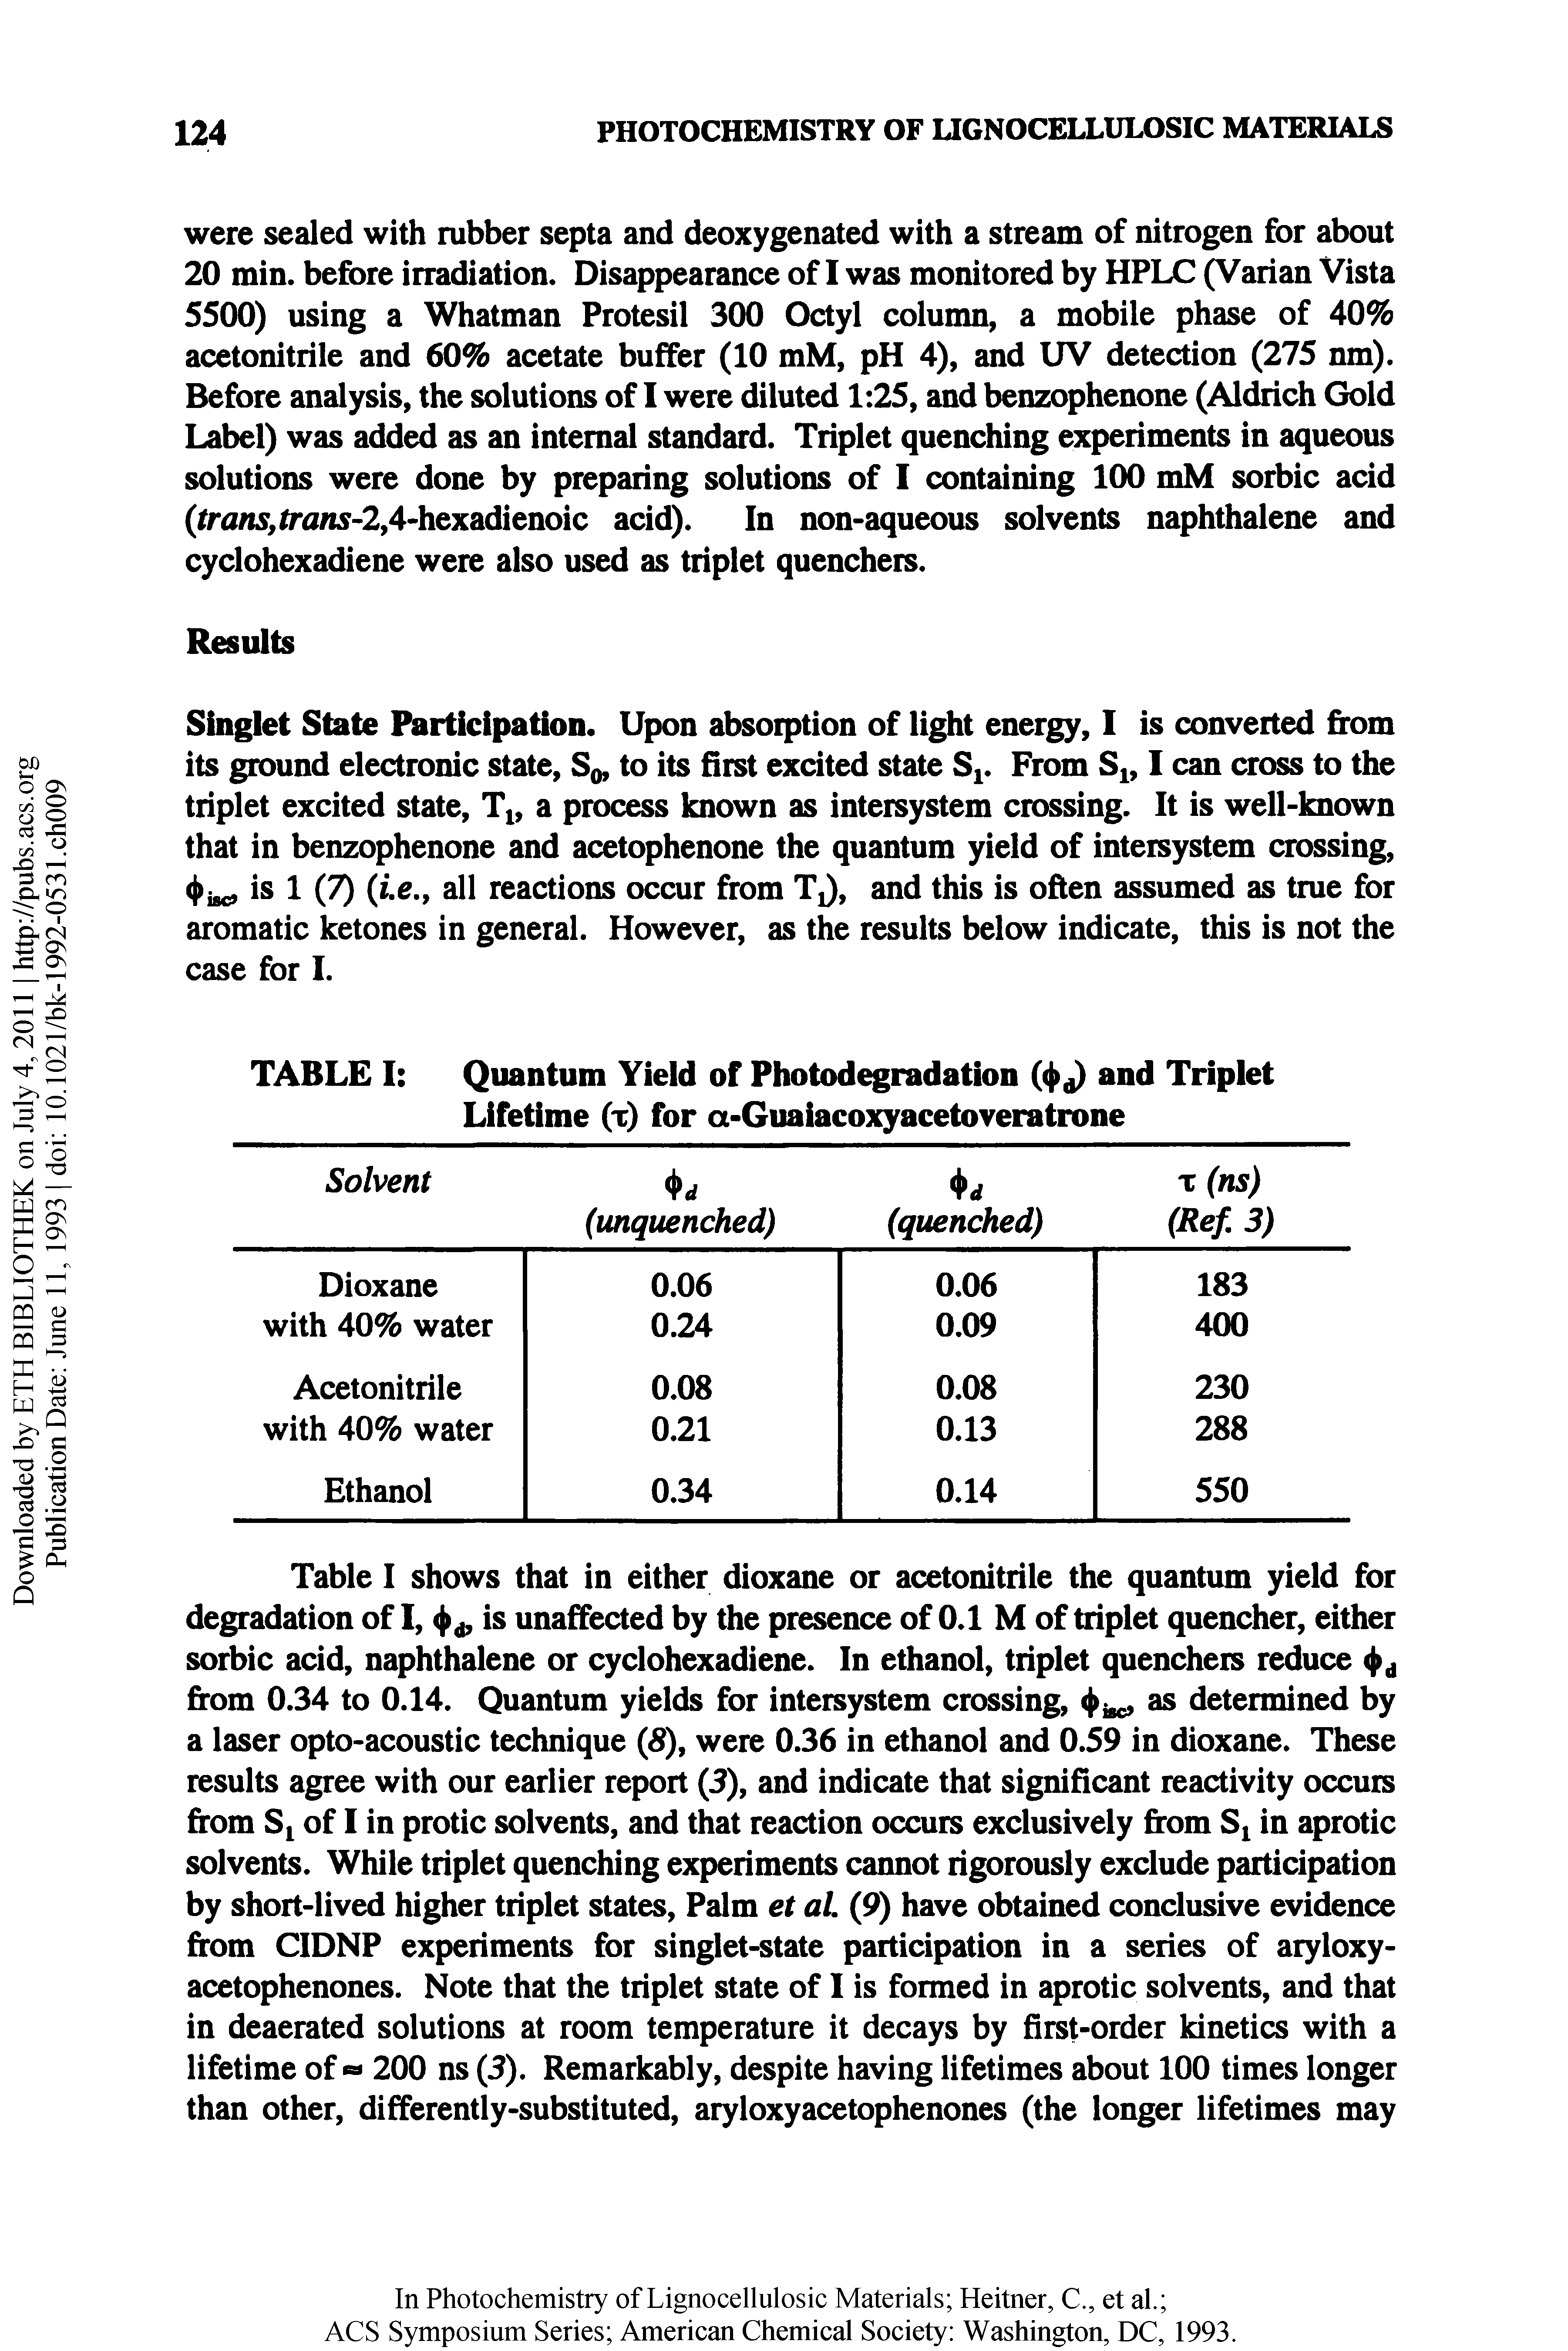 Table I shows that in either dioxane or acetonitrile the quantum yield for degradation of I, is unaffected by the presence of 0.1 M of triplet quencher, either sorbic acid, naphthalene or cyclohexadiene. In ethanol, triplet quenchers reduce < >d from 0.34 to 0.14. Quantum yields for intersystem crossing, as determined by a laser opto-acoustic technique ( ), were 0.36 in ethanol and 0.59 in dioxane. These results agree with our earlier report (3), and indicate that significant reactivity occurs from St of I in protic solvents, and that reaction occurs exclusively from Sx in aprotic solvents. While triplet quenching experiments cannot rigorously exclude participation by short-lived higher triplet states, Palm et al (9) have obtained conclusive evidence from CIDNP experiments for singlet-state participation in a series of aryloxy-acetophenones. Note that the triplet state of I is formed in aprotic solvents, and that in deaerated solutions at room temperature it decays by first-order kinetics with a lifetime of 200 ns (3). Remarkably, despite having lifetimes about 100 times longer than other, differently-substituted, aryloxyacetophenones (the longer lifetimes may...